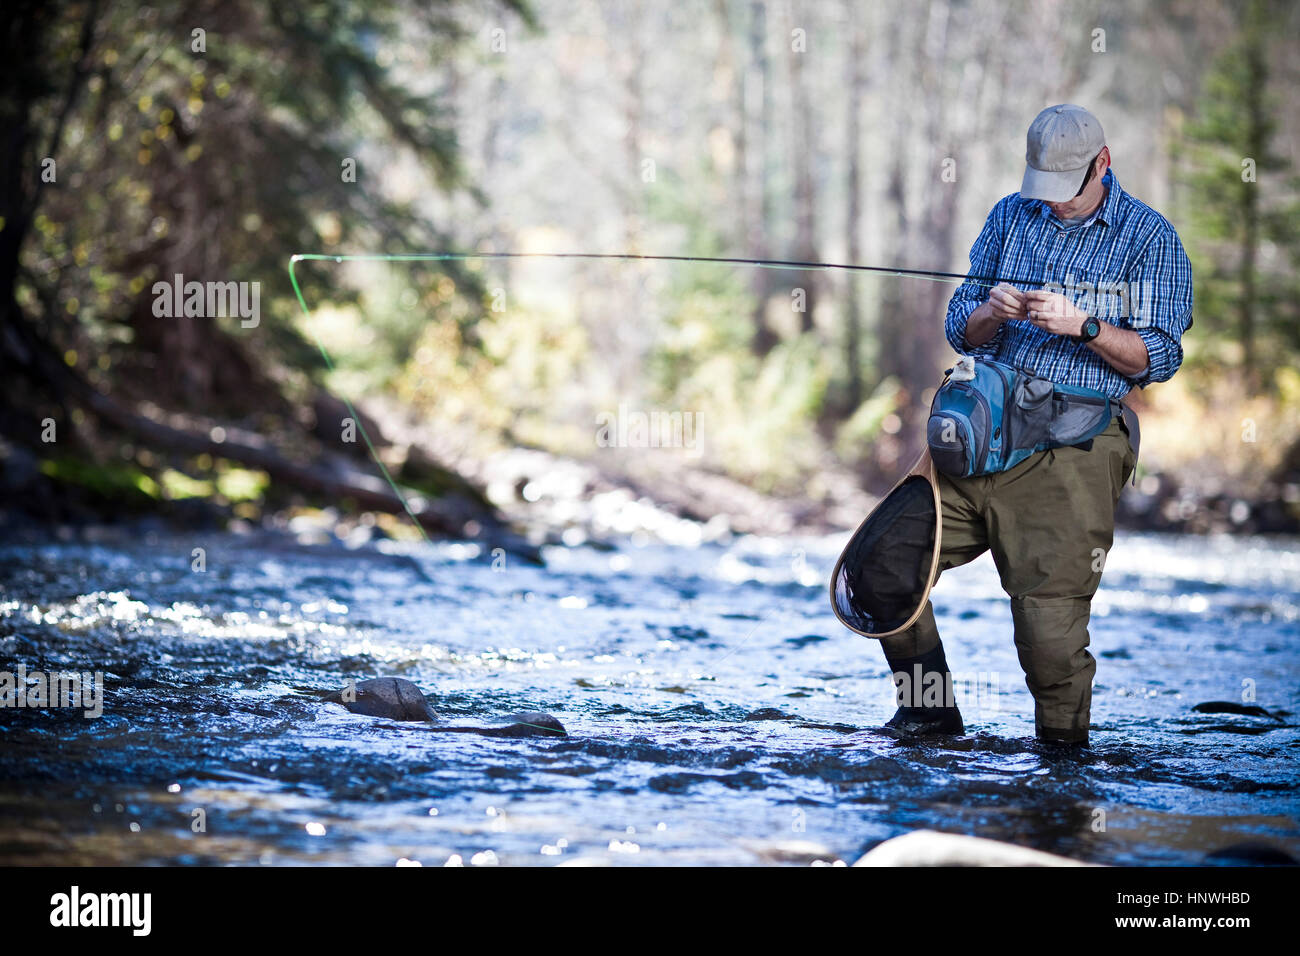 Fisherman ankle deep in river fly fishing, Colorado, USA Stock Photo